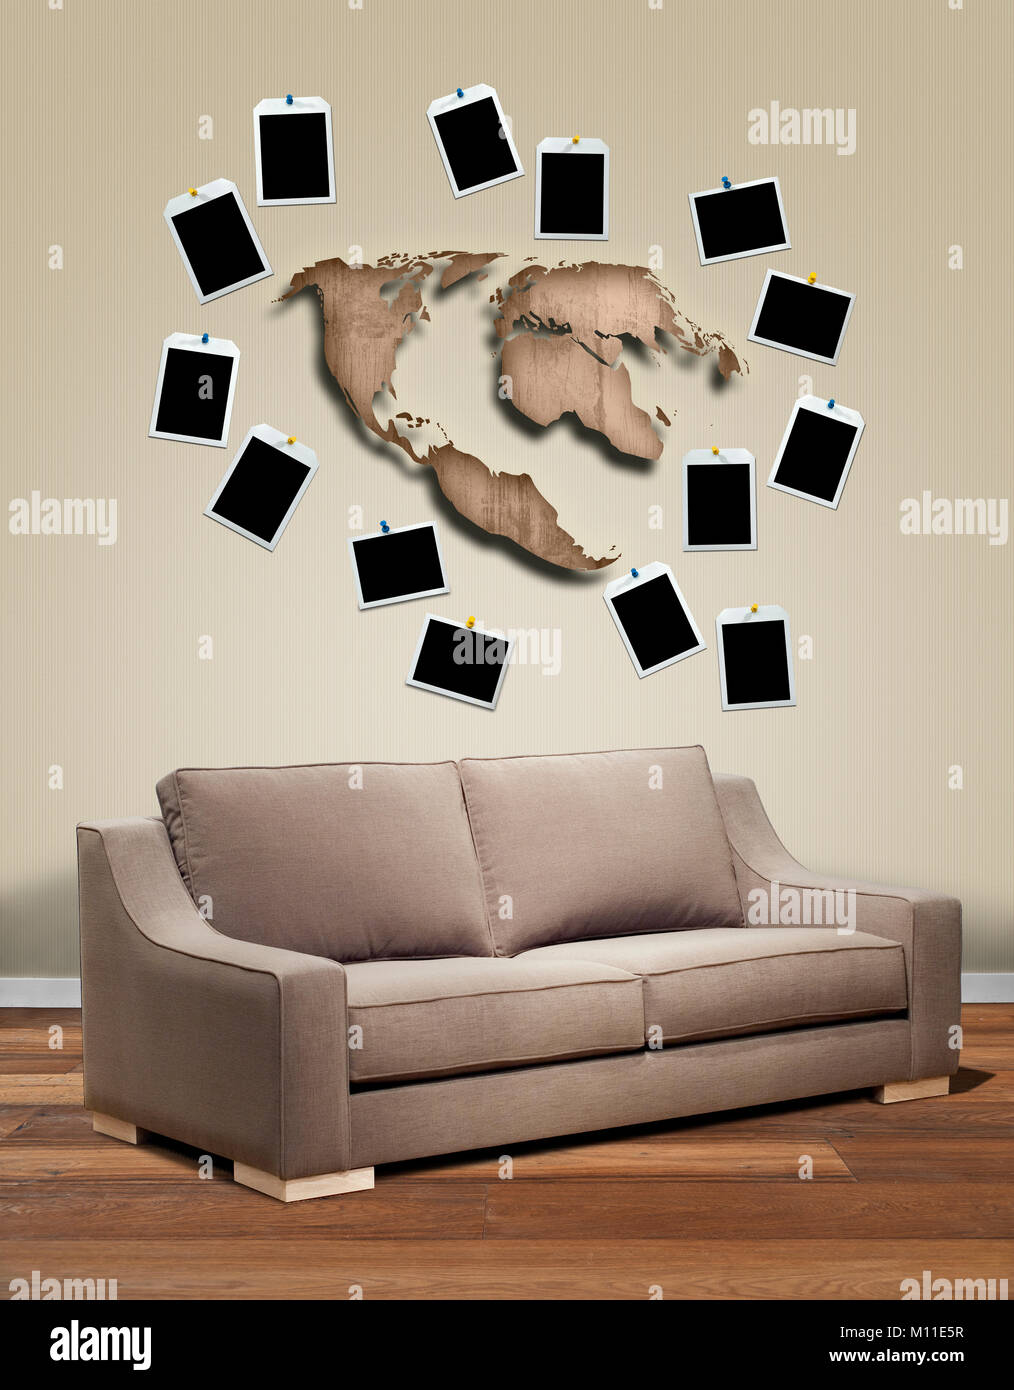 Modern interior with sofa and metal cartography of the world. Souvenir in frame at the wall Stock Photo